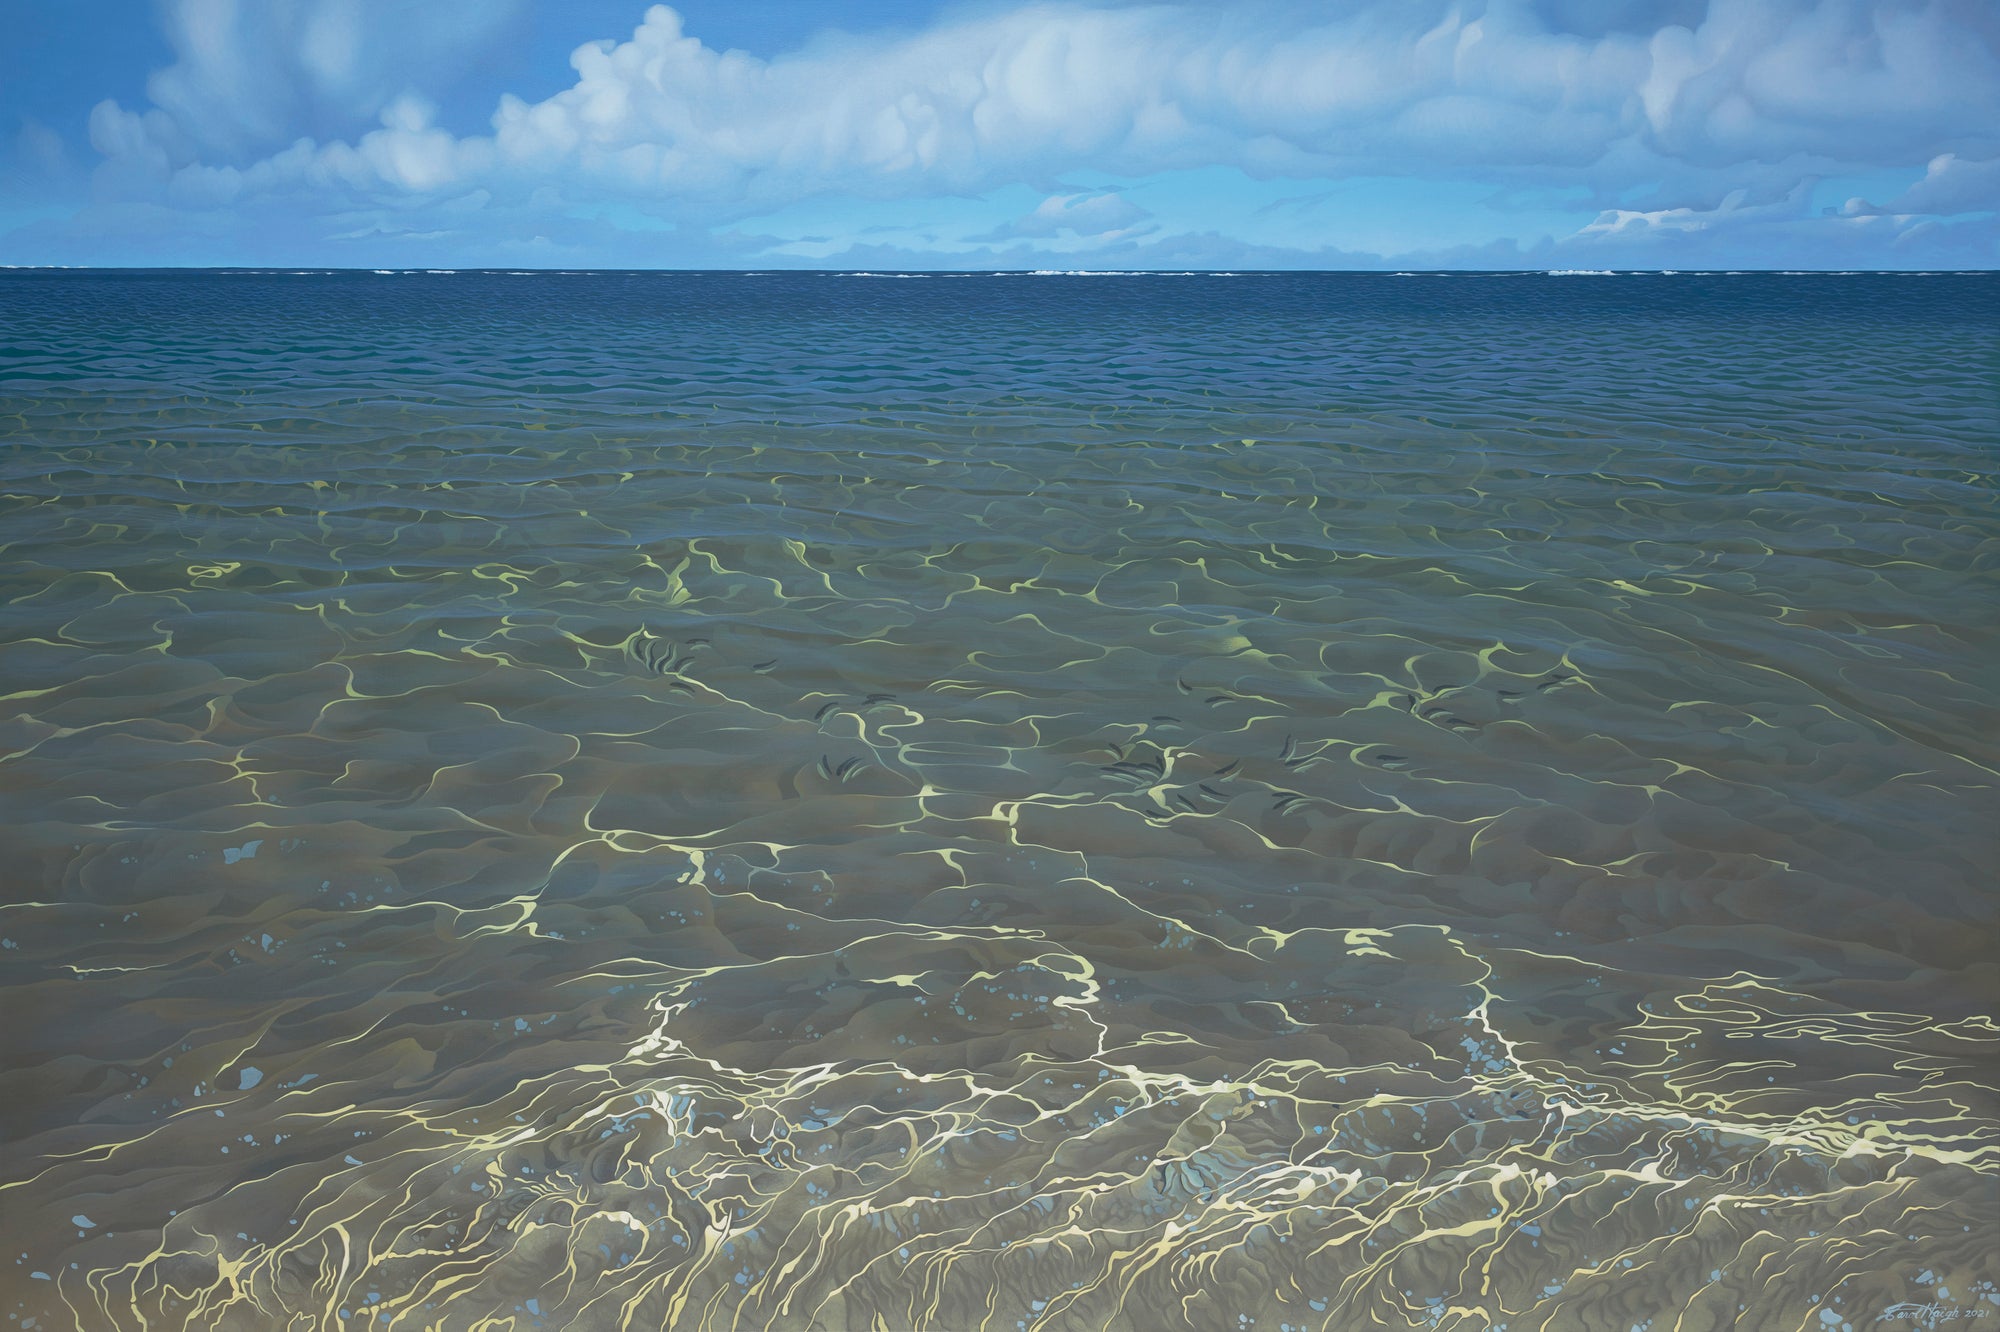 hyper realistic painting of reef with reflections in the water that look like real life ocean stretches well past mid canvas towards a beautiful cloudy sky